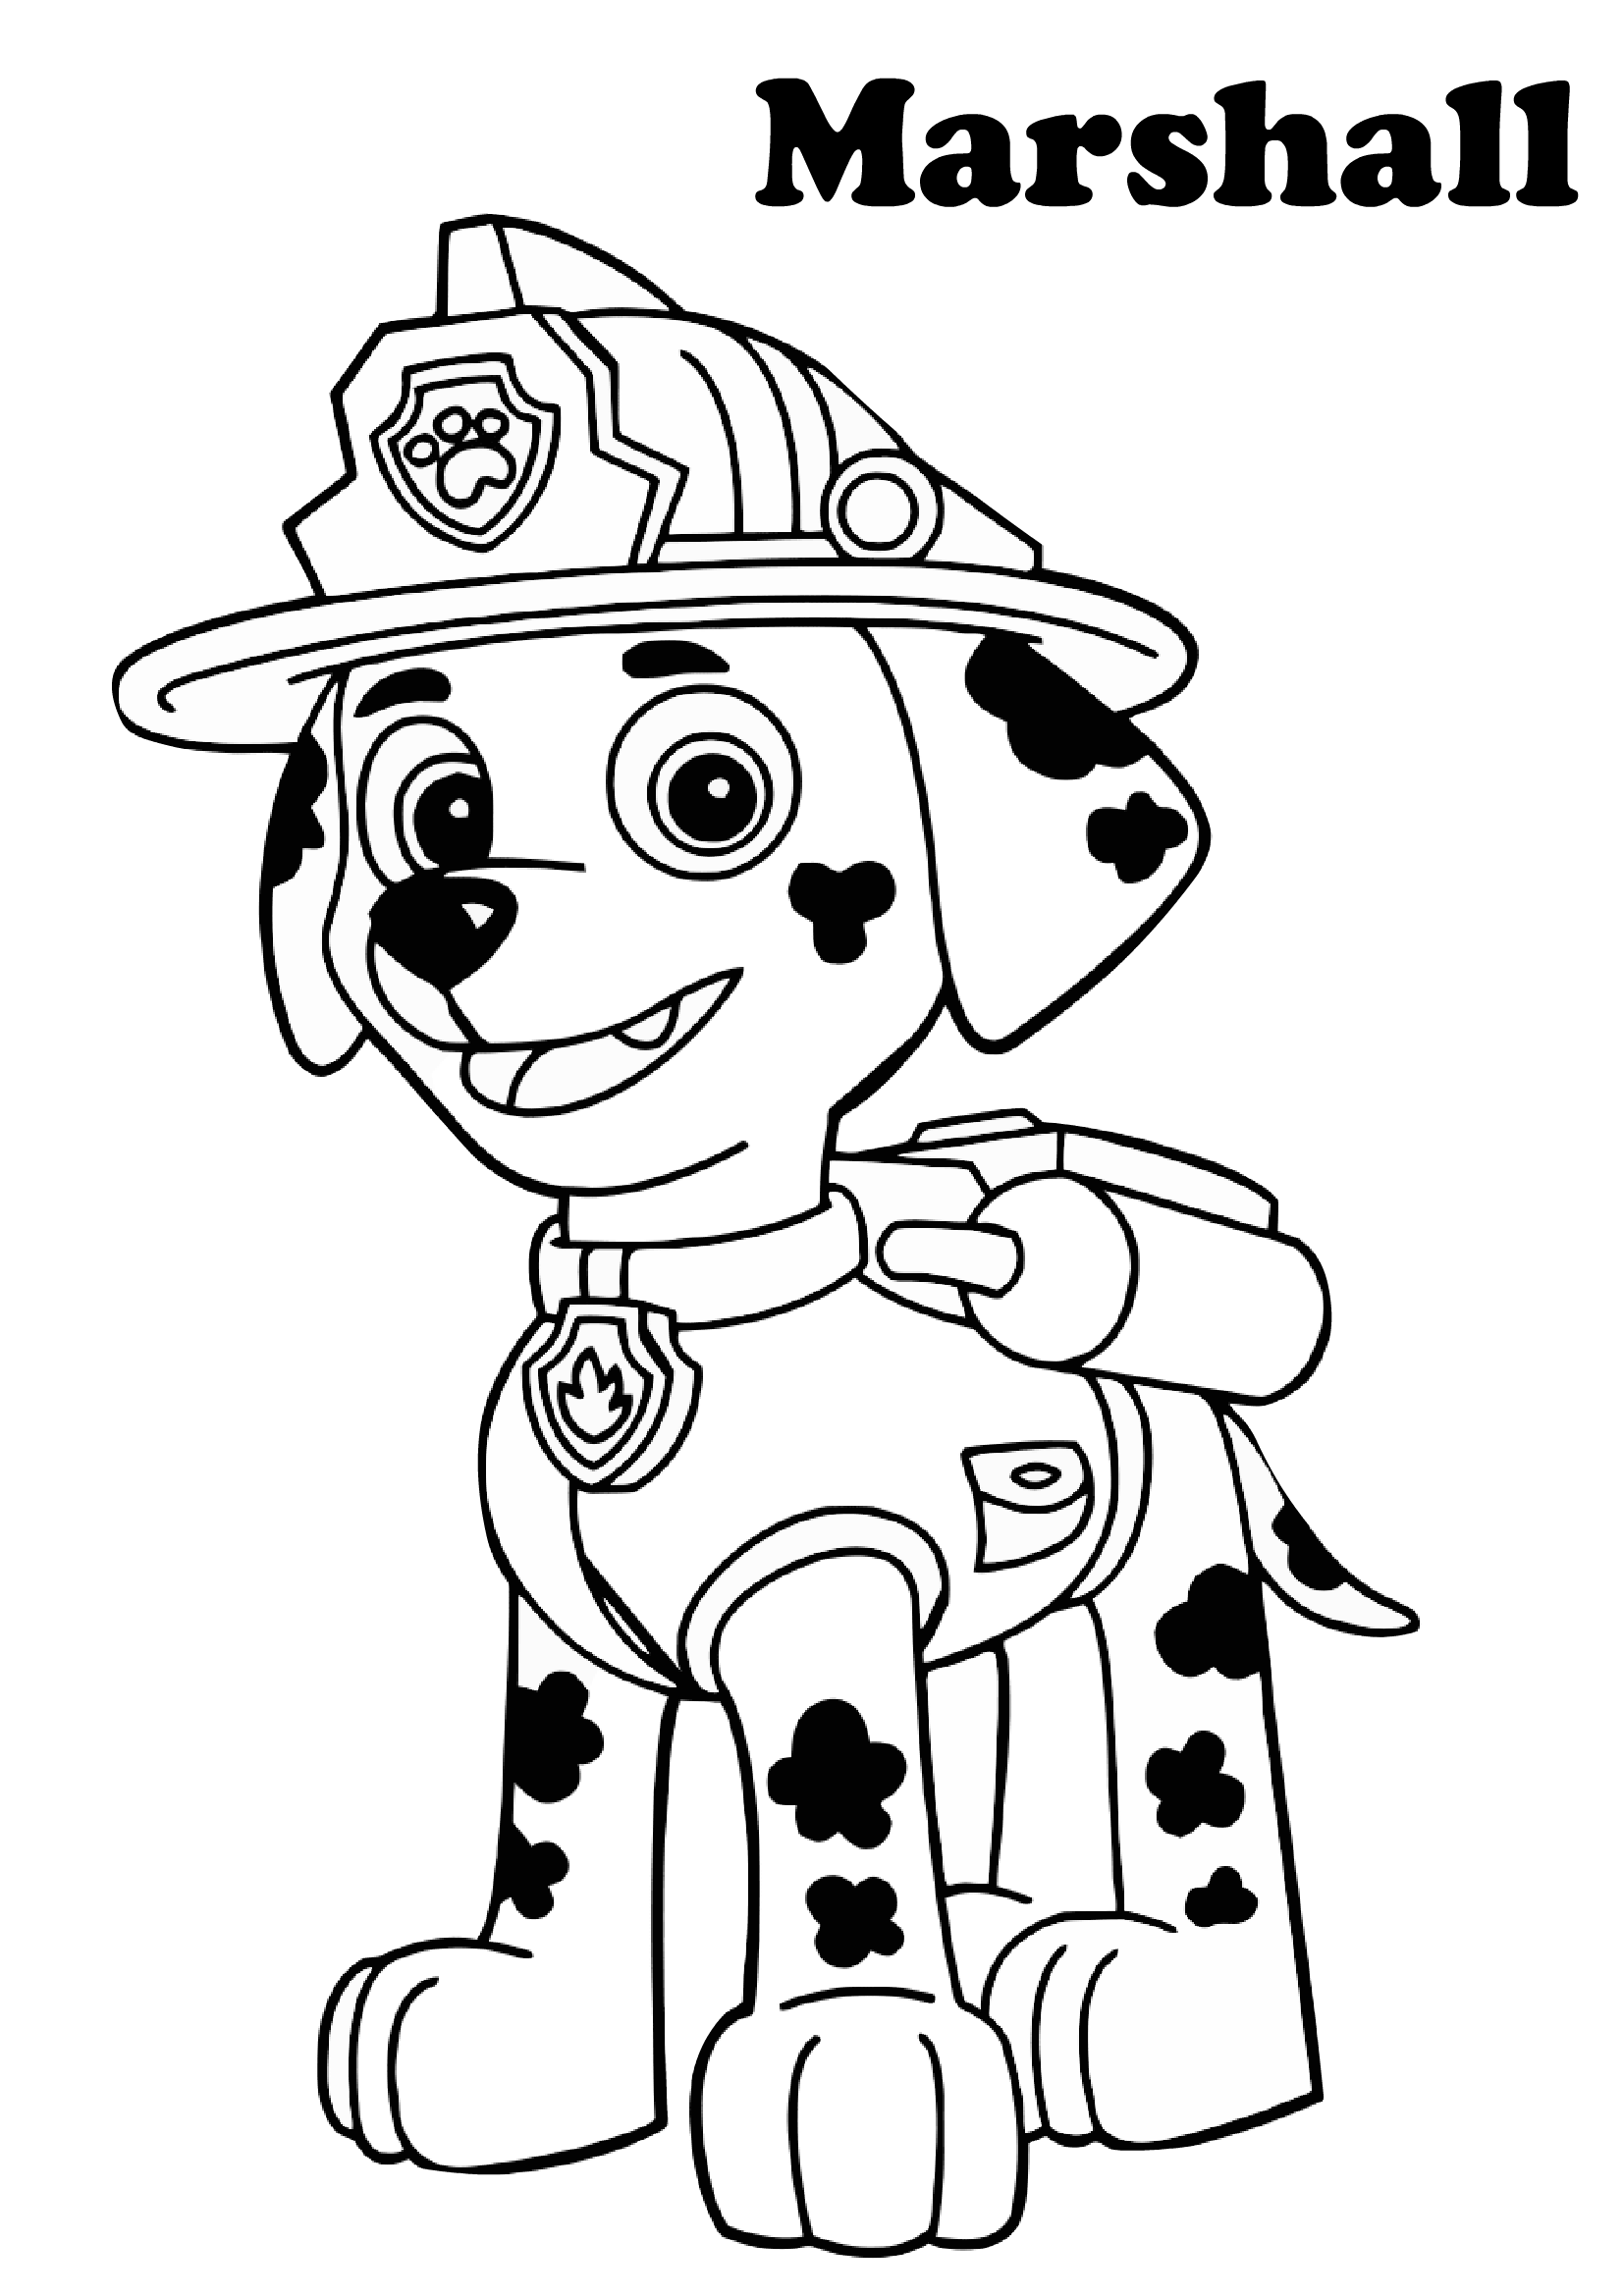 Paw Patrol Printable Coloring Pages For Kids 2020 Print Color Craft